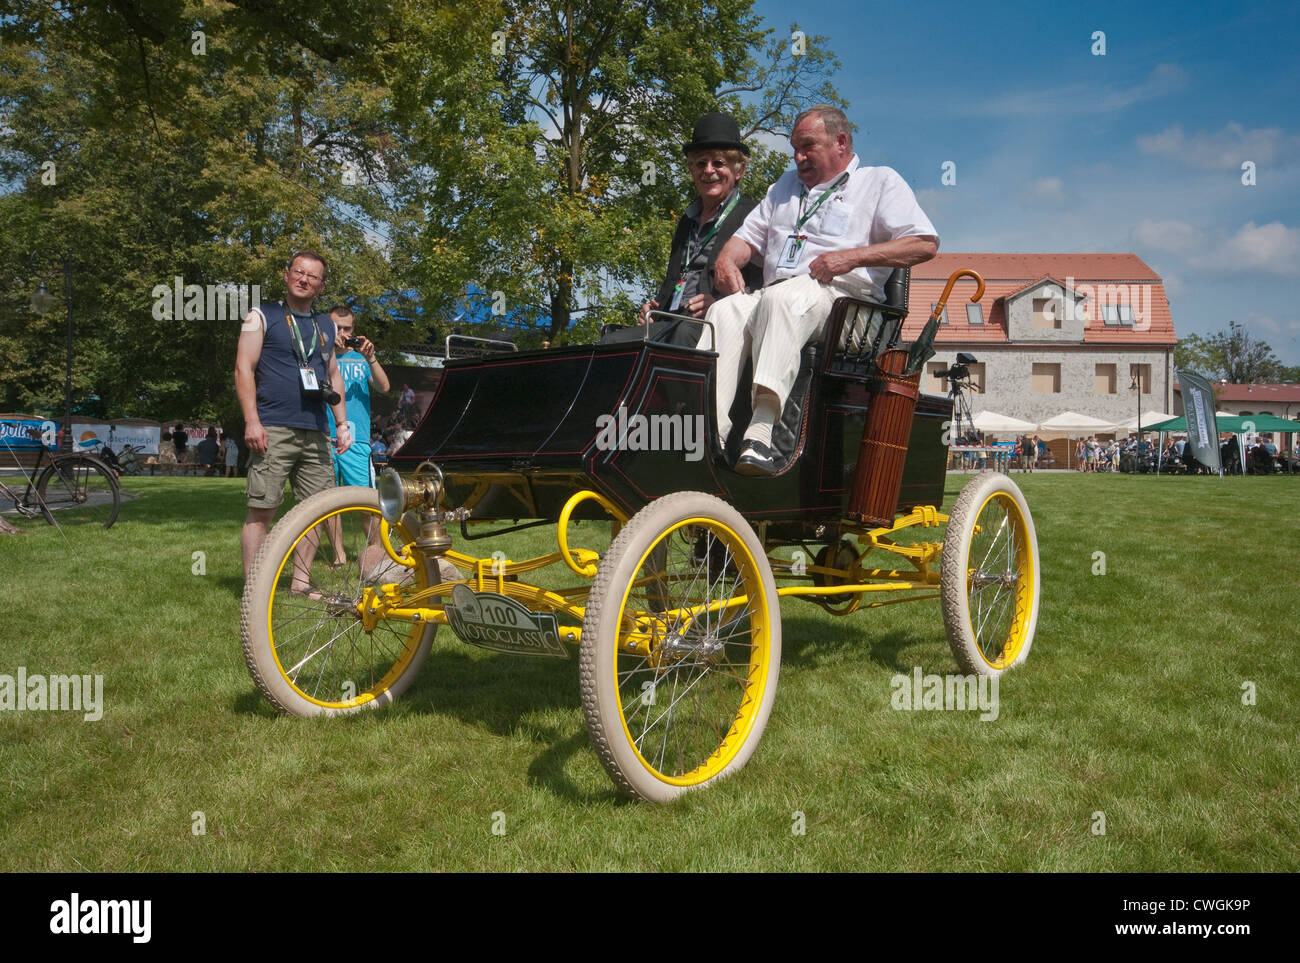 1899 Grout Steam New Home, steam powered automobile at Motoclassic car show at Topacz Castle in Kobierzyce near Wroclaw, Poland Stock Photo